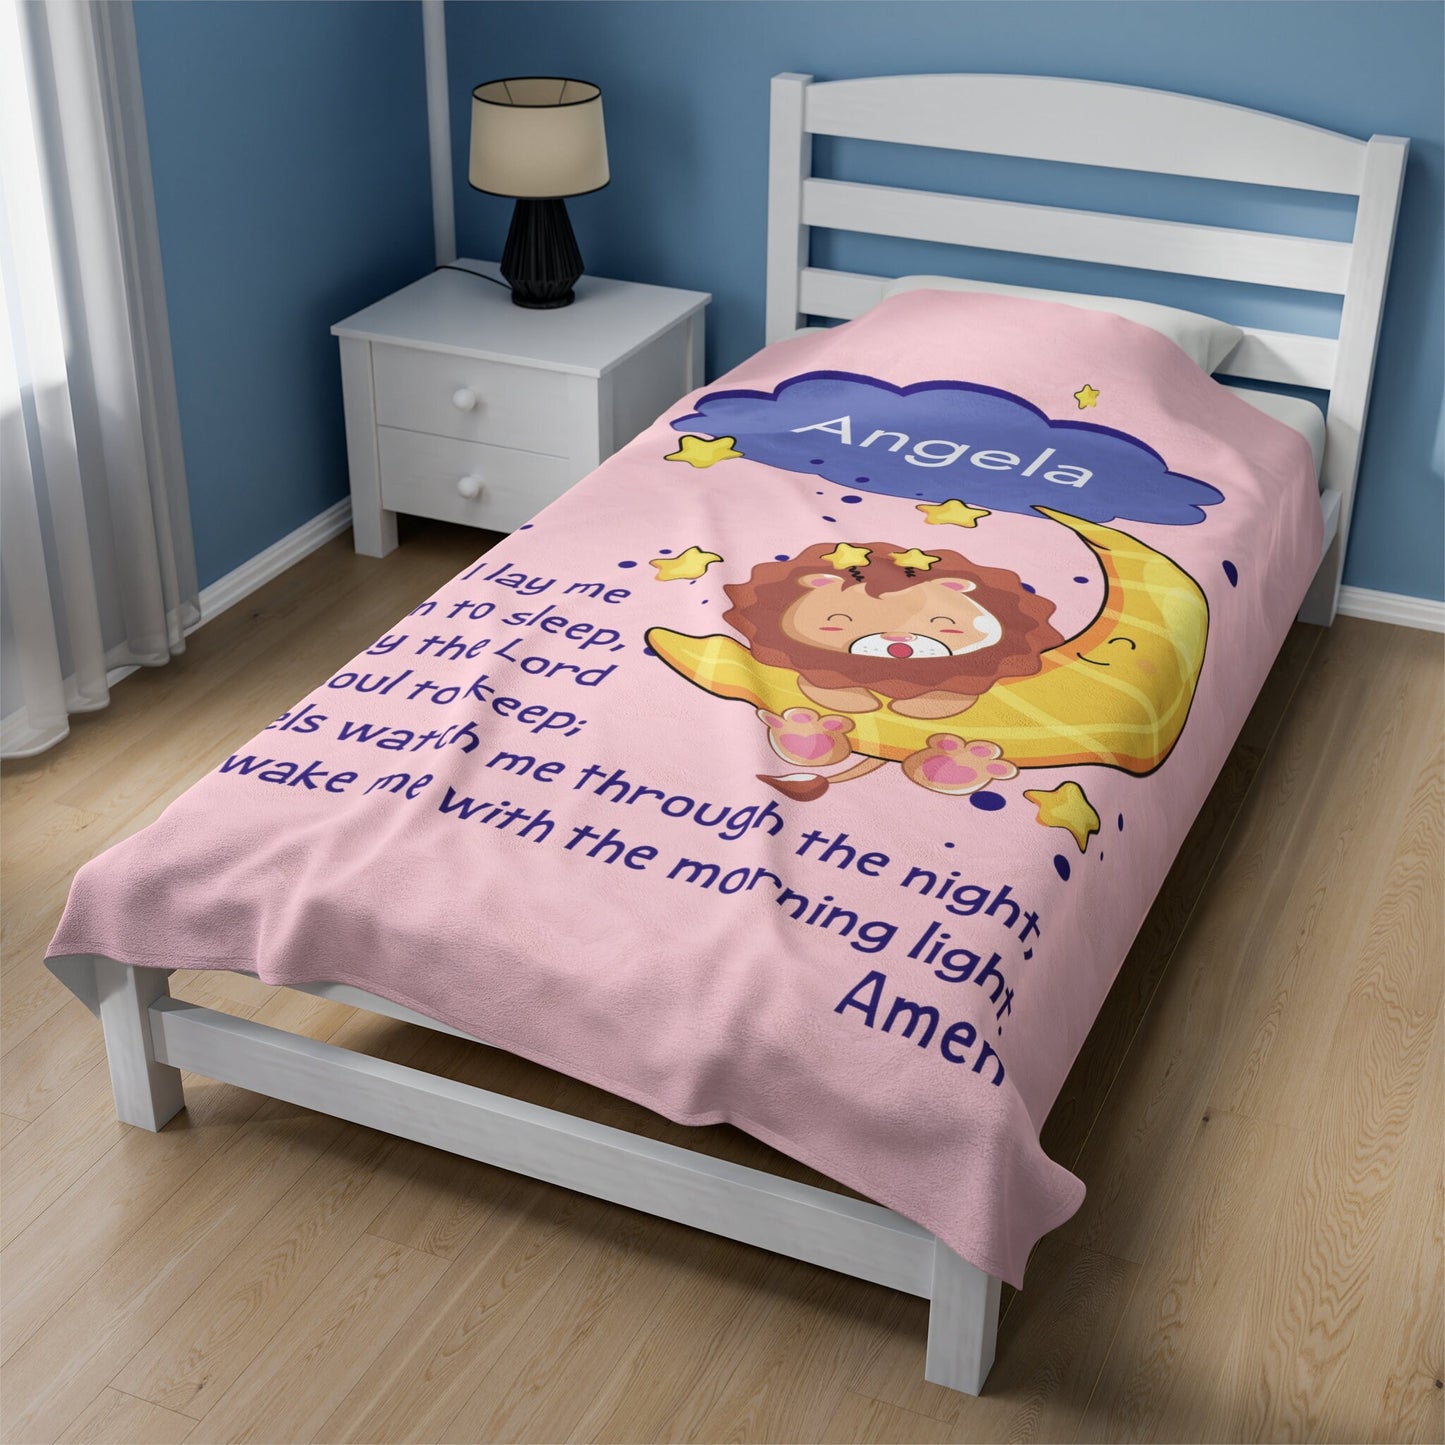 a bed with a pink comforter with a lion on it